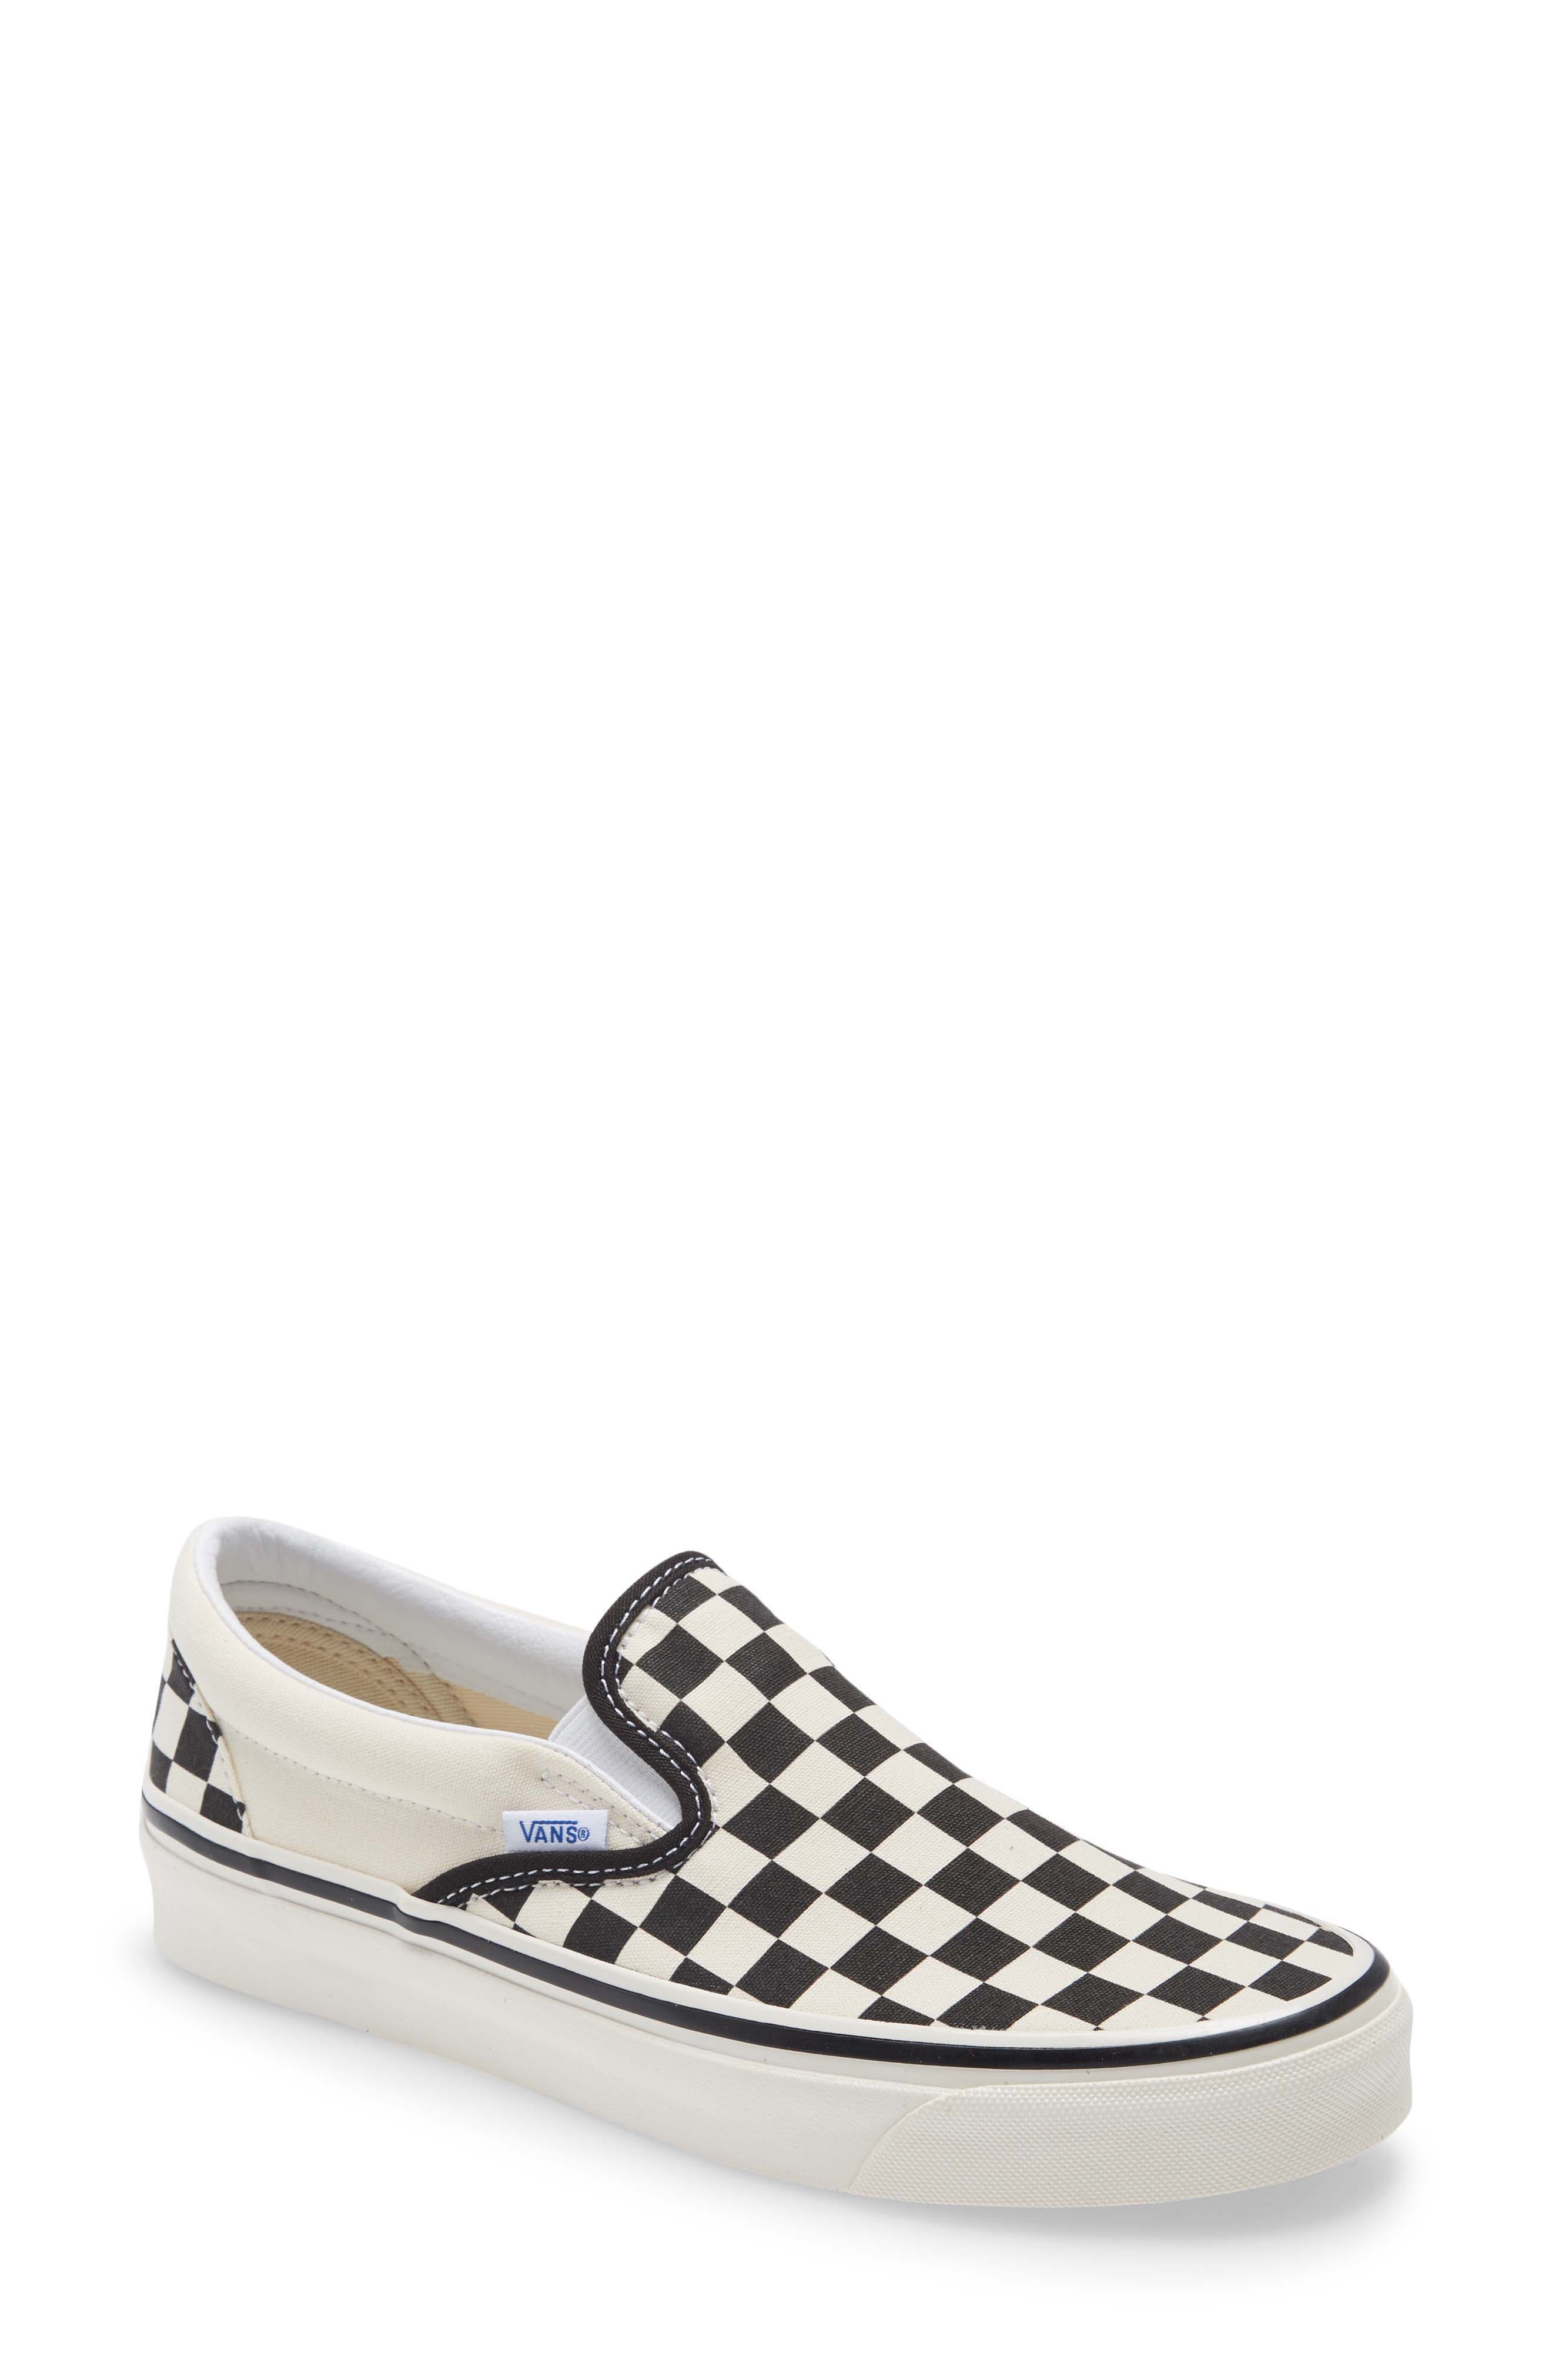 checkered vans shoes sale